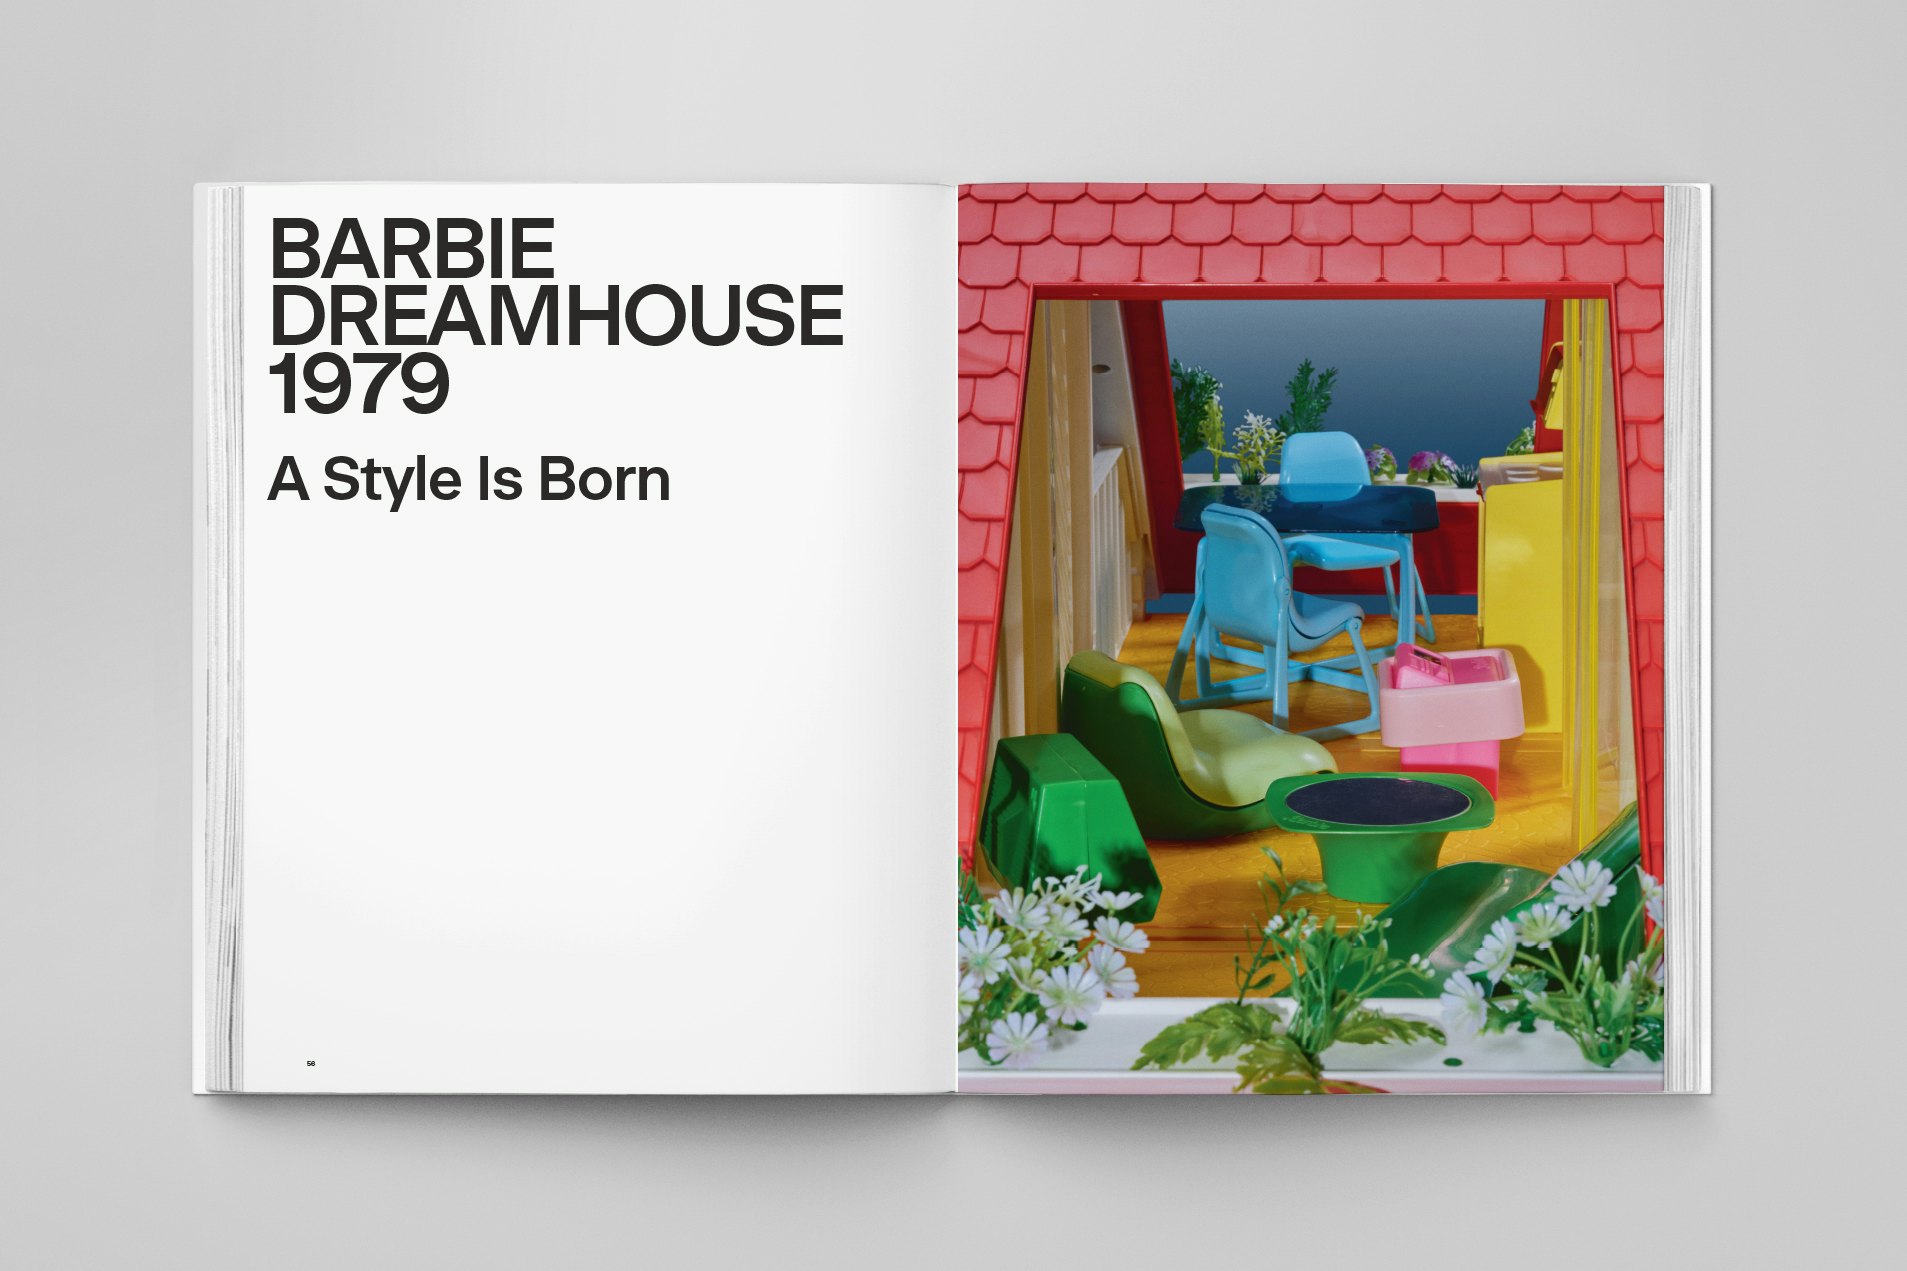 A Barbie Dreamhouse Architecture Art Book Is Coming